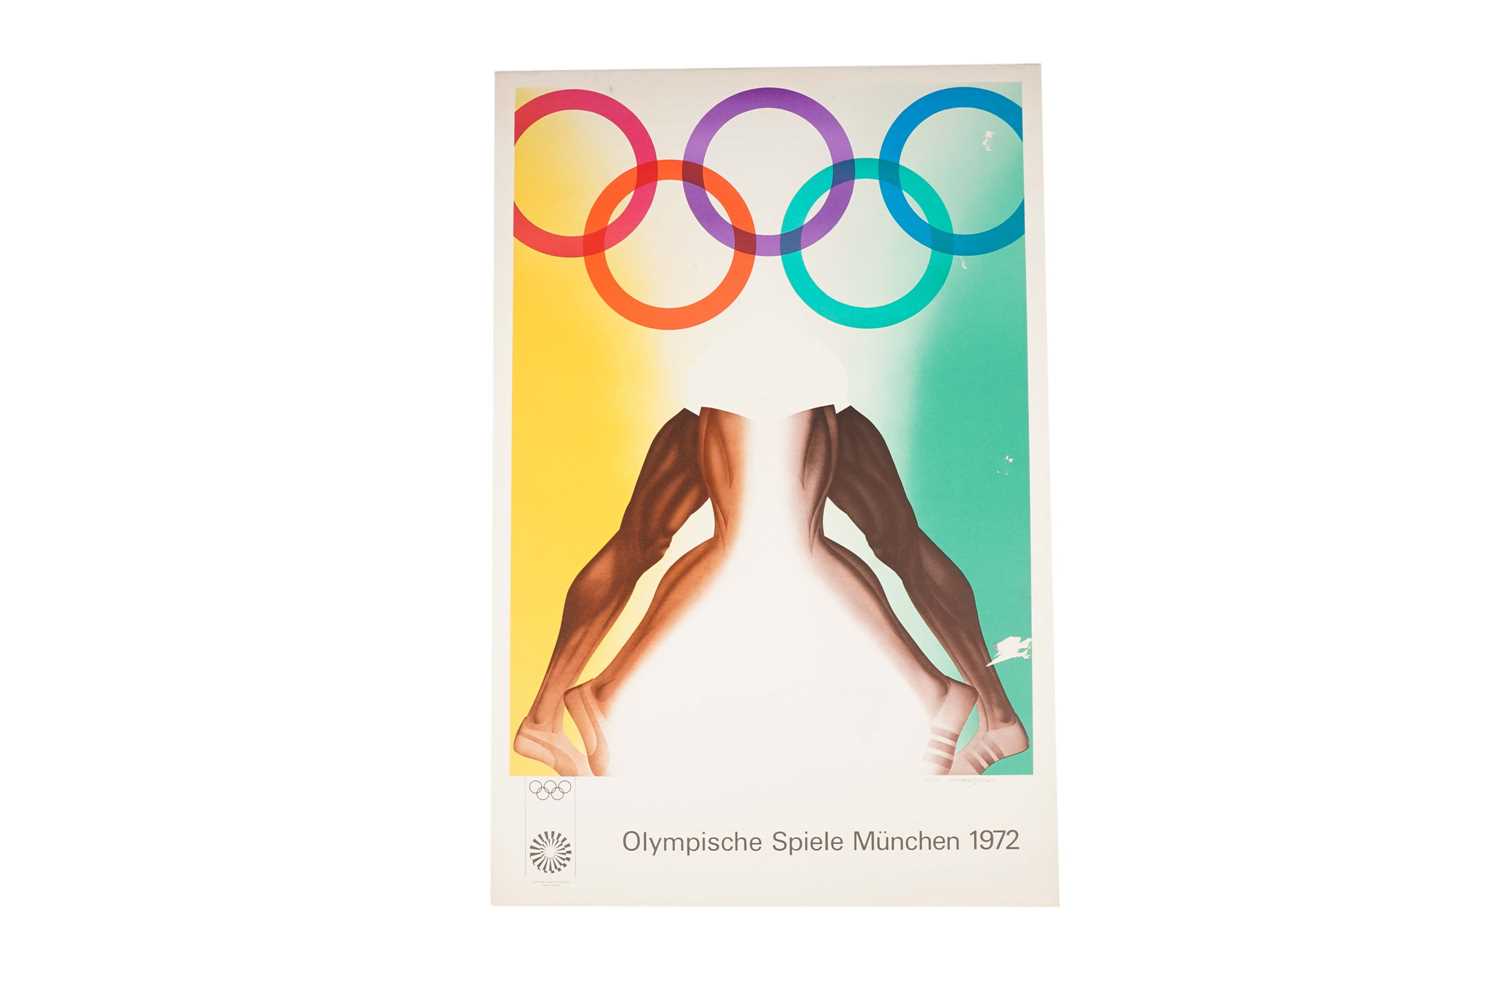 Allen Jones RA - Olympic Games Munich 1972 poster | signed limited edition serigraph